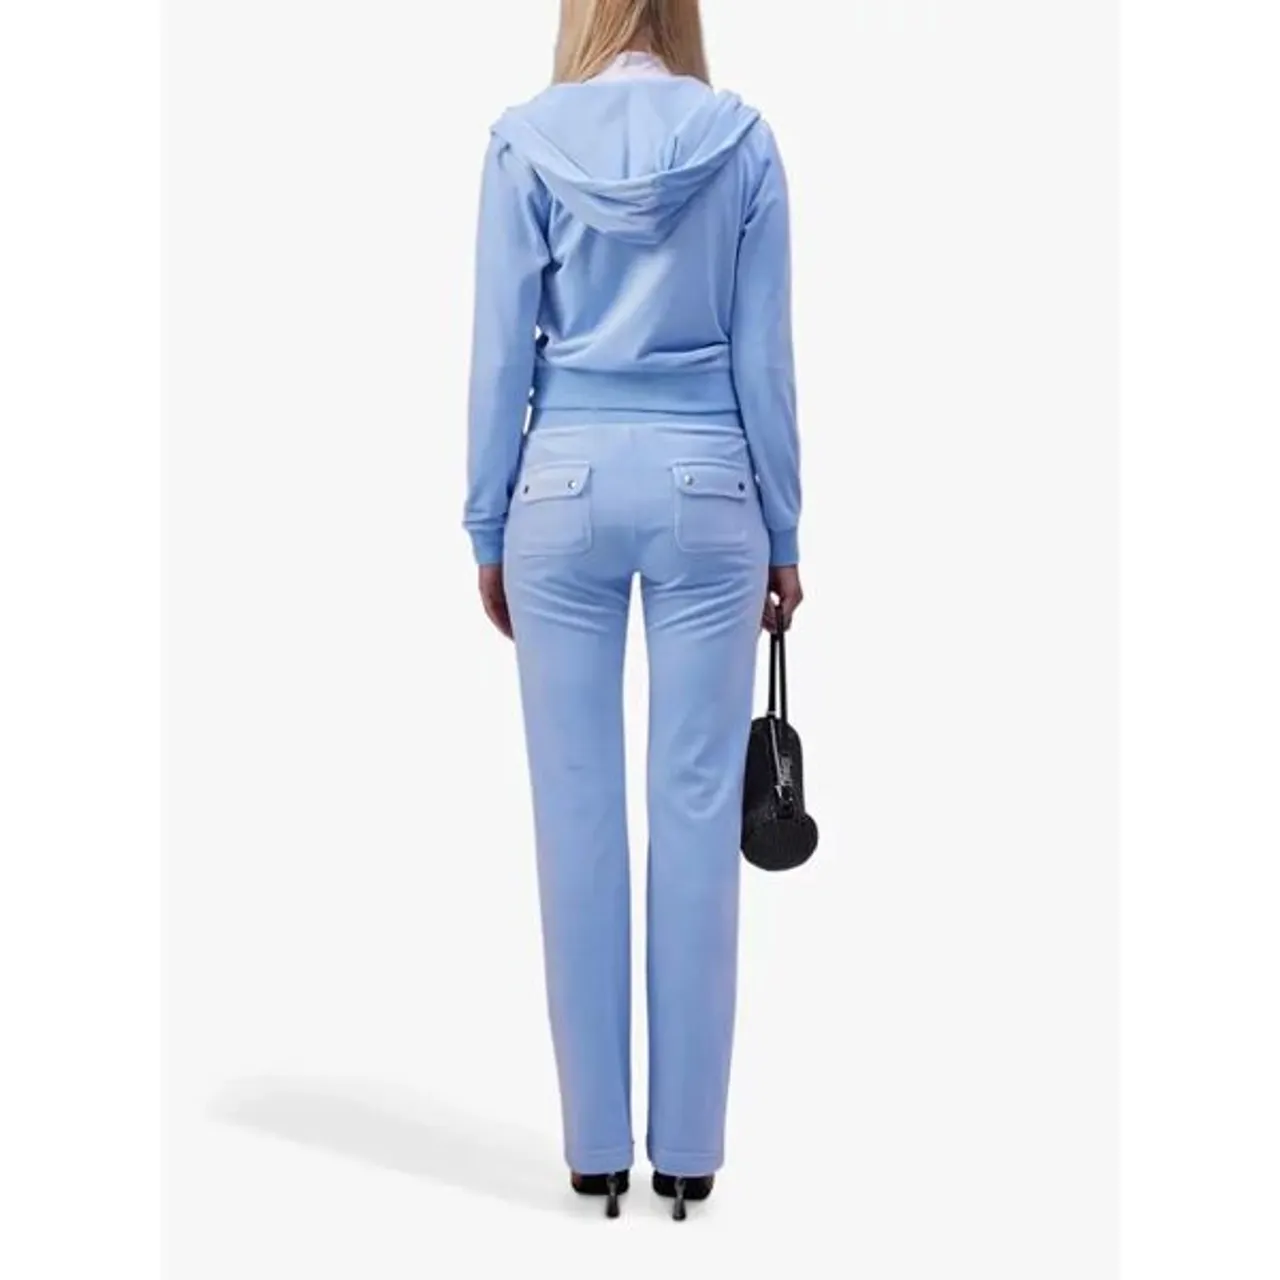 Juicy Couture Del Ray Tracksuit Bottoms - Powder Blue - Female